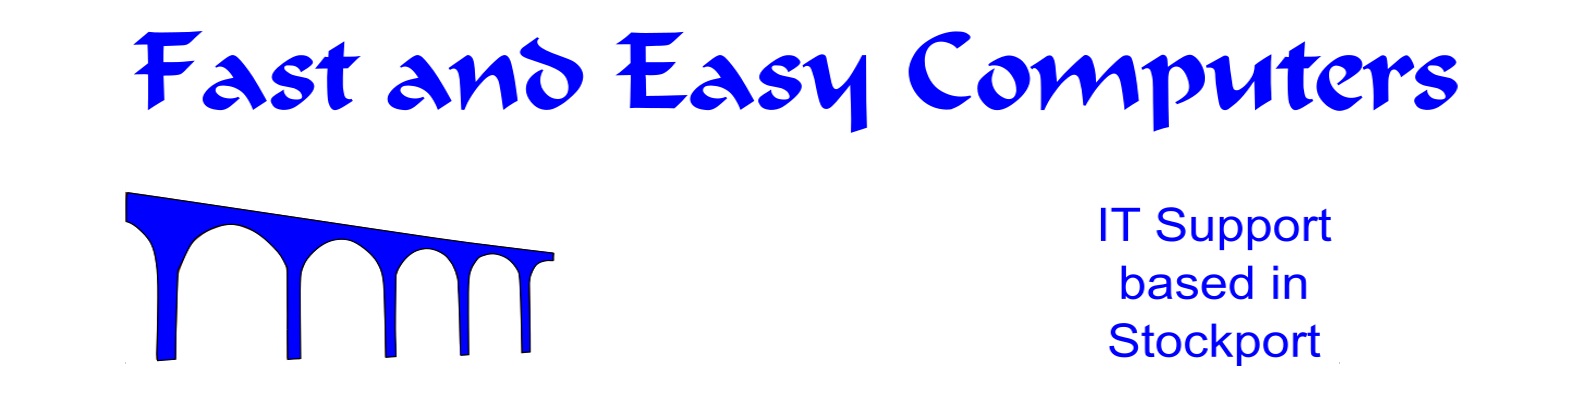 Fast and Easy Computers